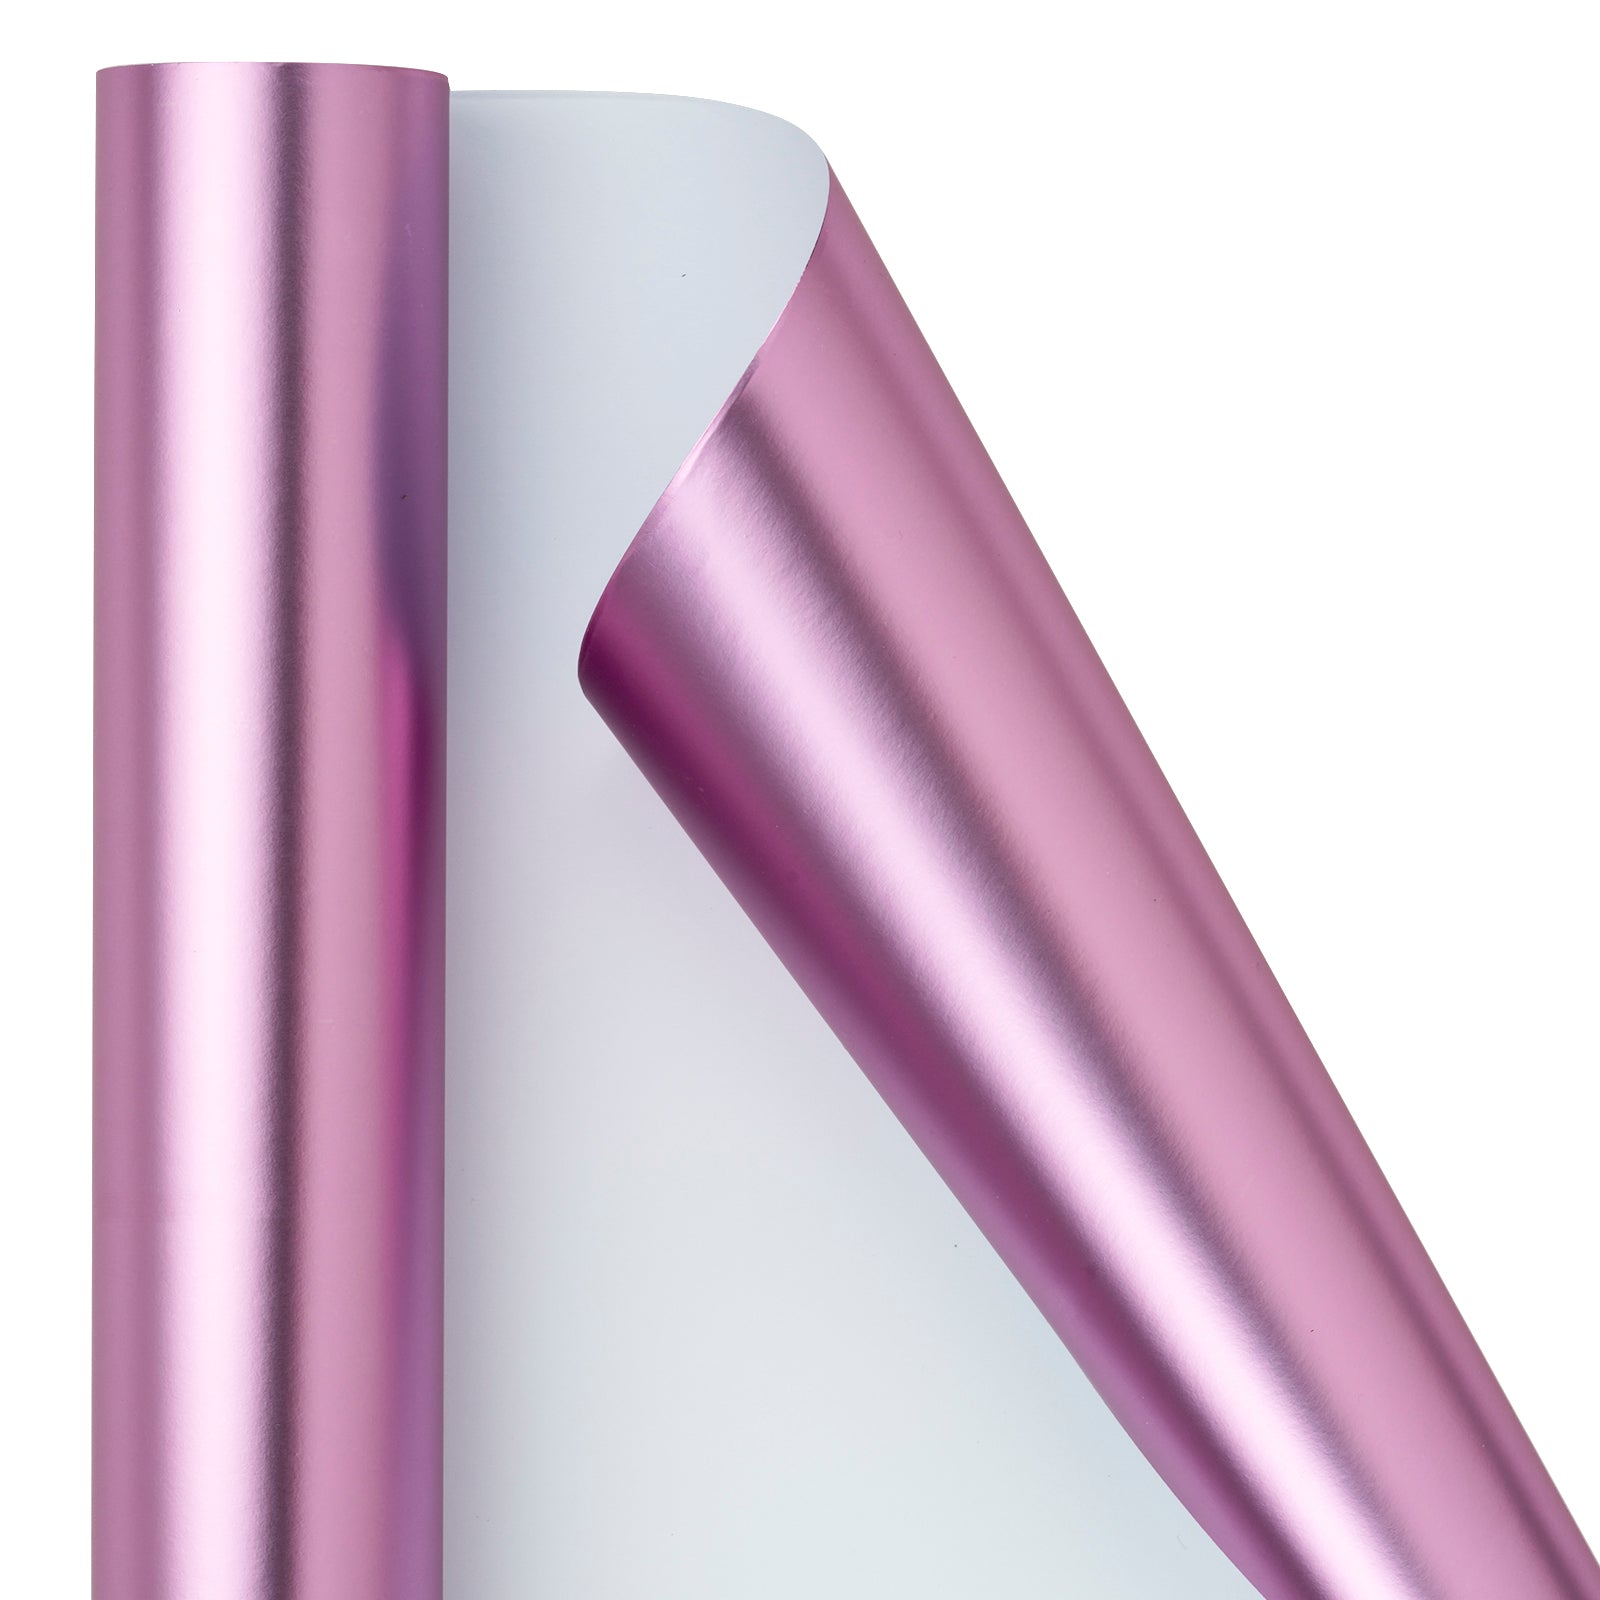 Matte Metallic Wrapping Paper Roll Plum Ream Wholesale Wrapaholic